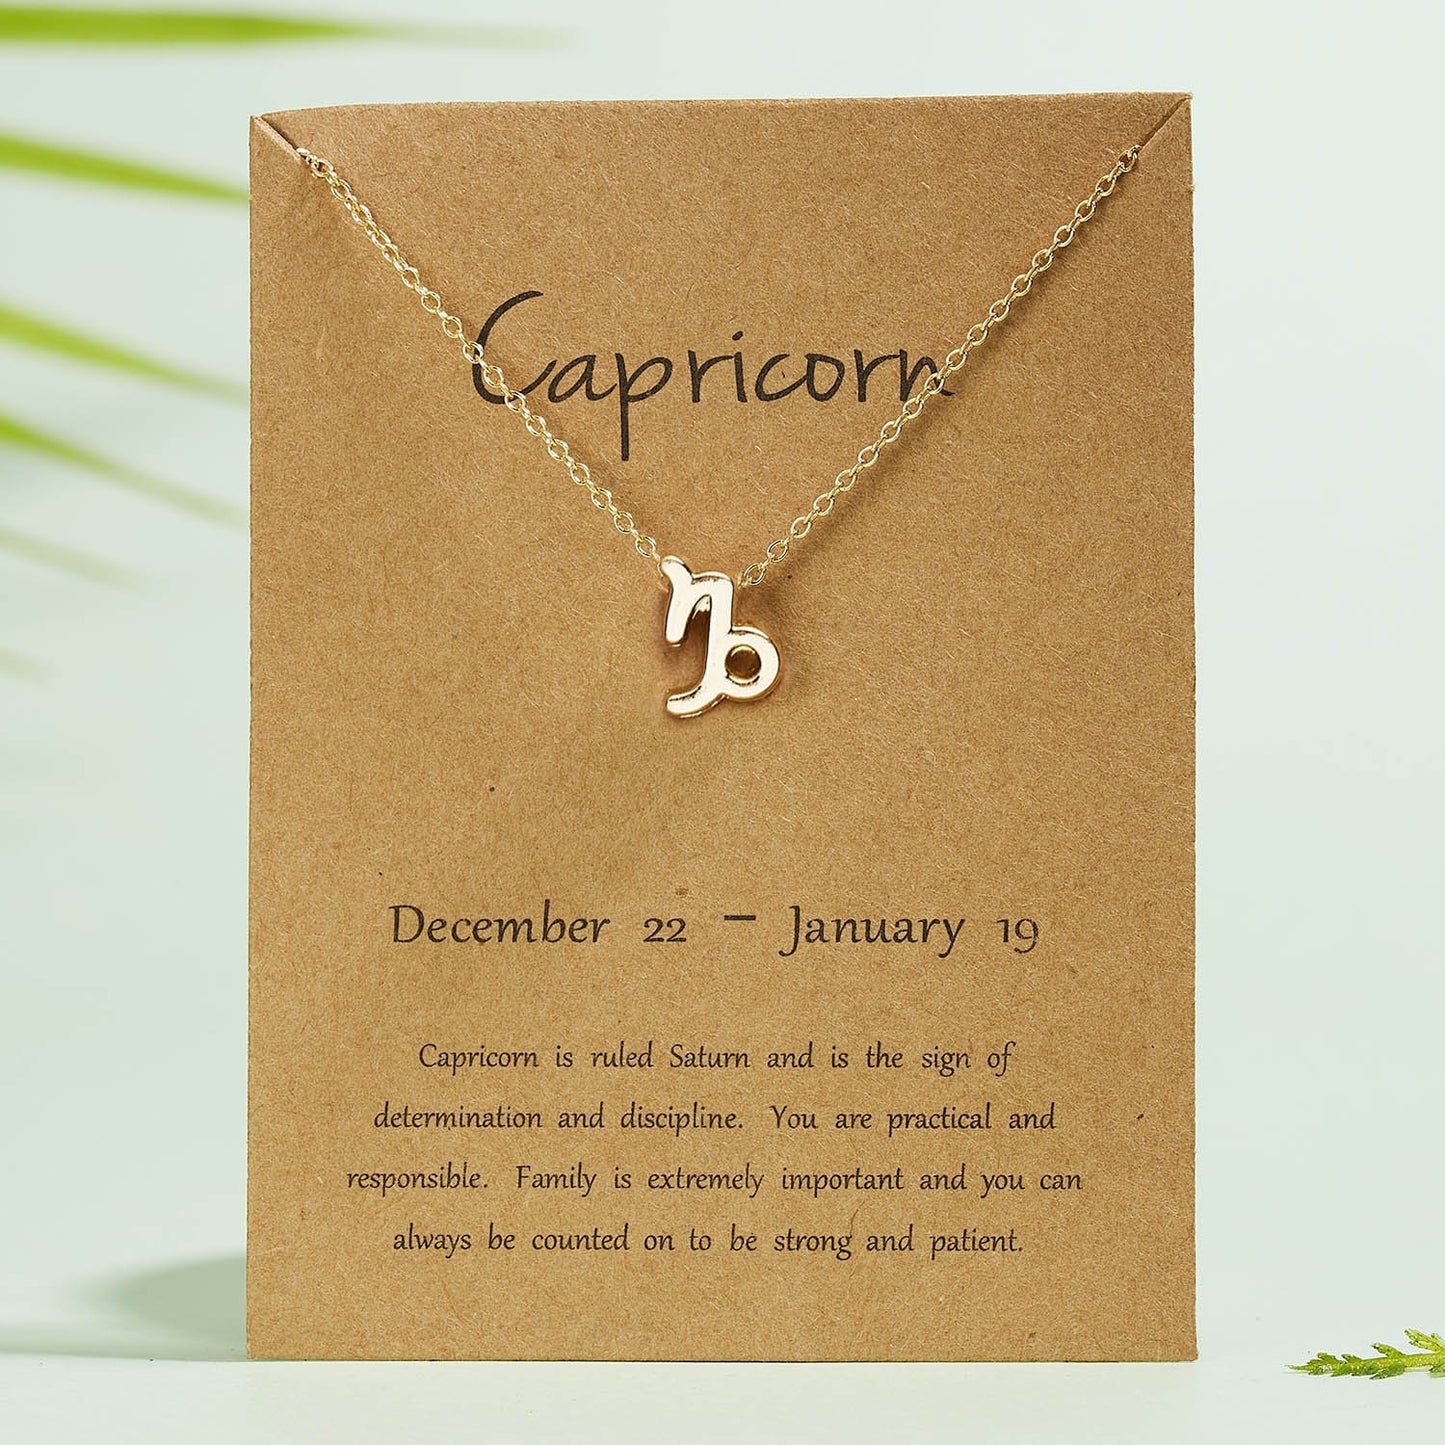 12 Zodiac Horoscope Female Star Sign Constellation Pendant Gold Chain Leo Choker Necklaces for Women Jewelry Collier